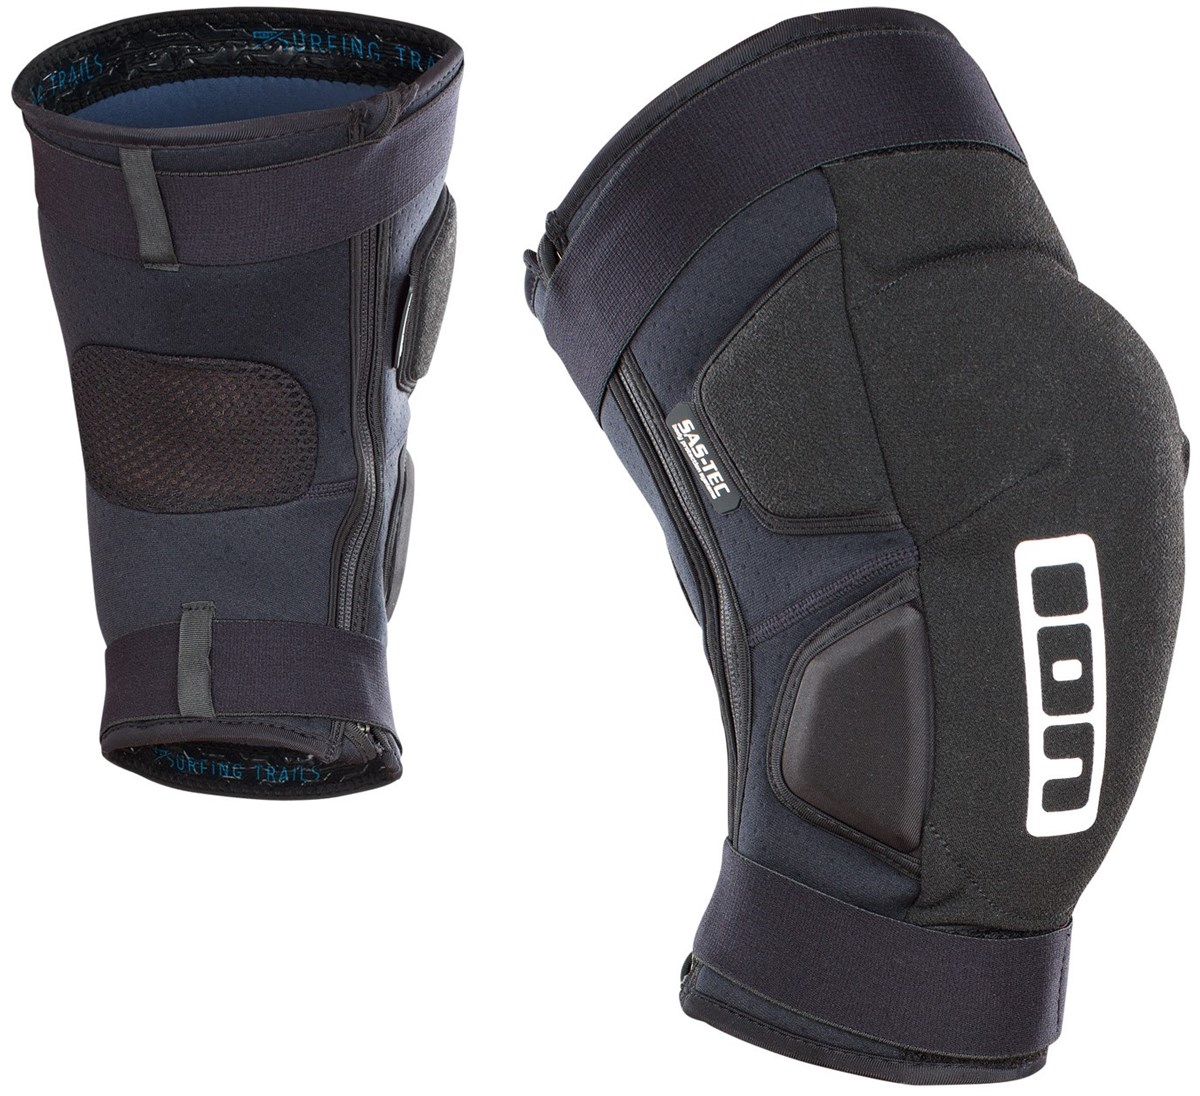 Ion K Pact Amp Protection Knee Guards SS17